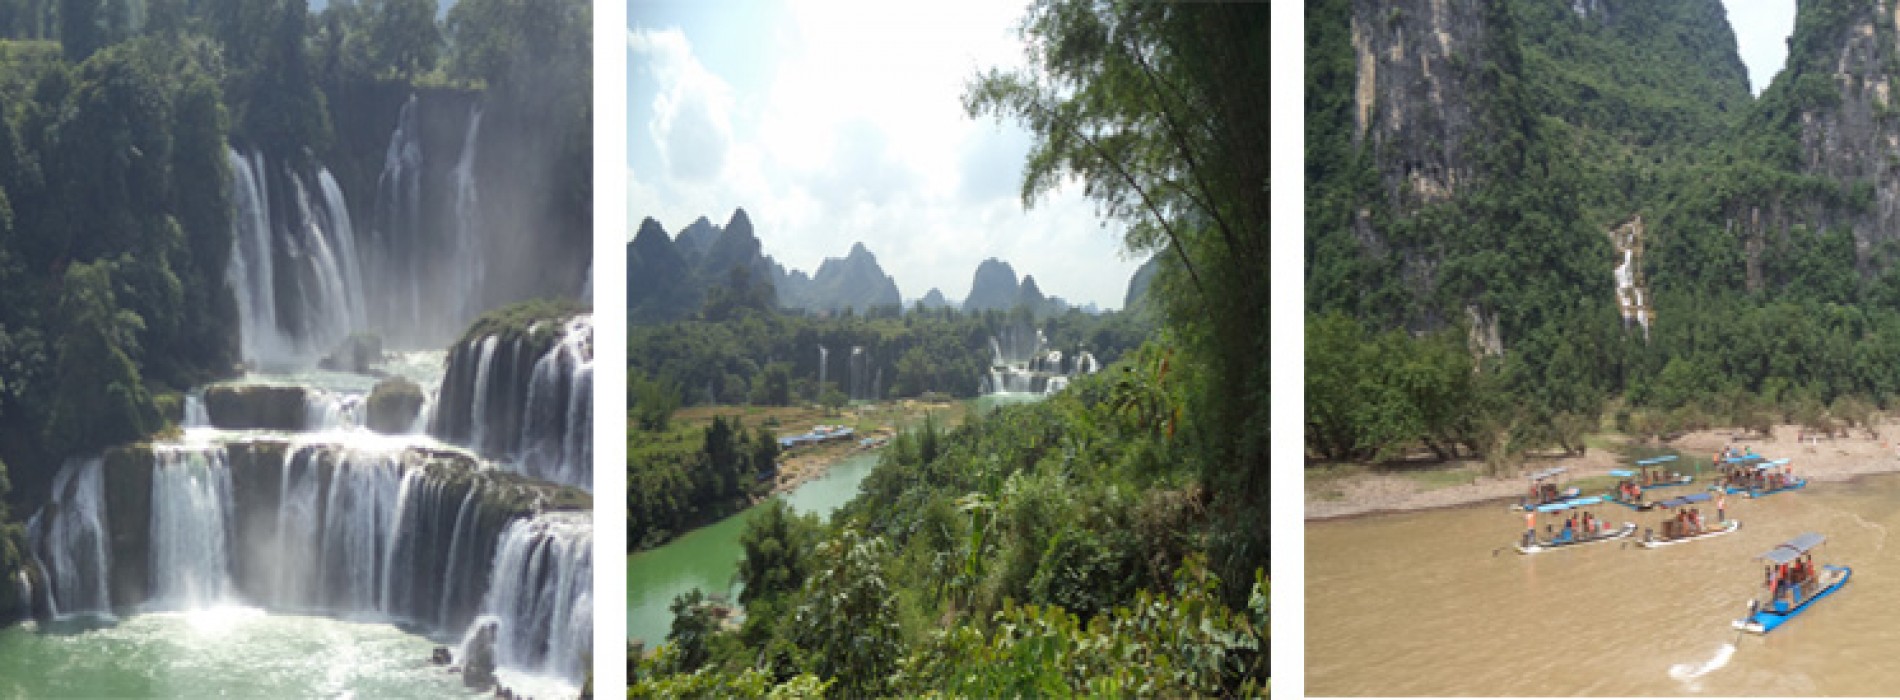 Guilin: a historical and wonderful city in Guangxi